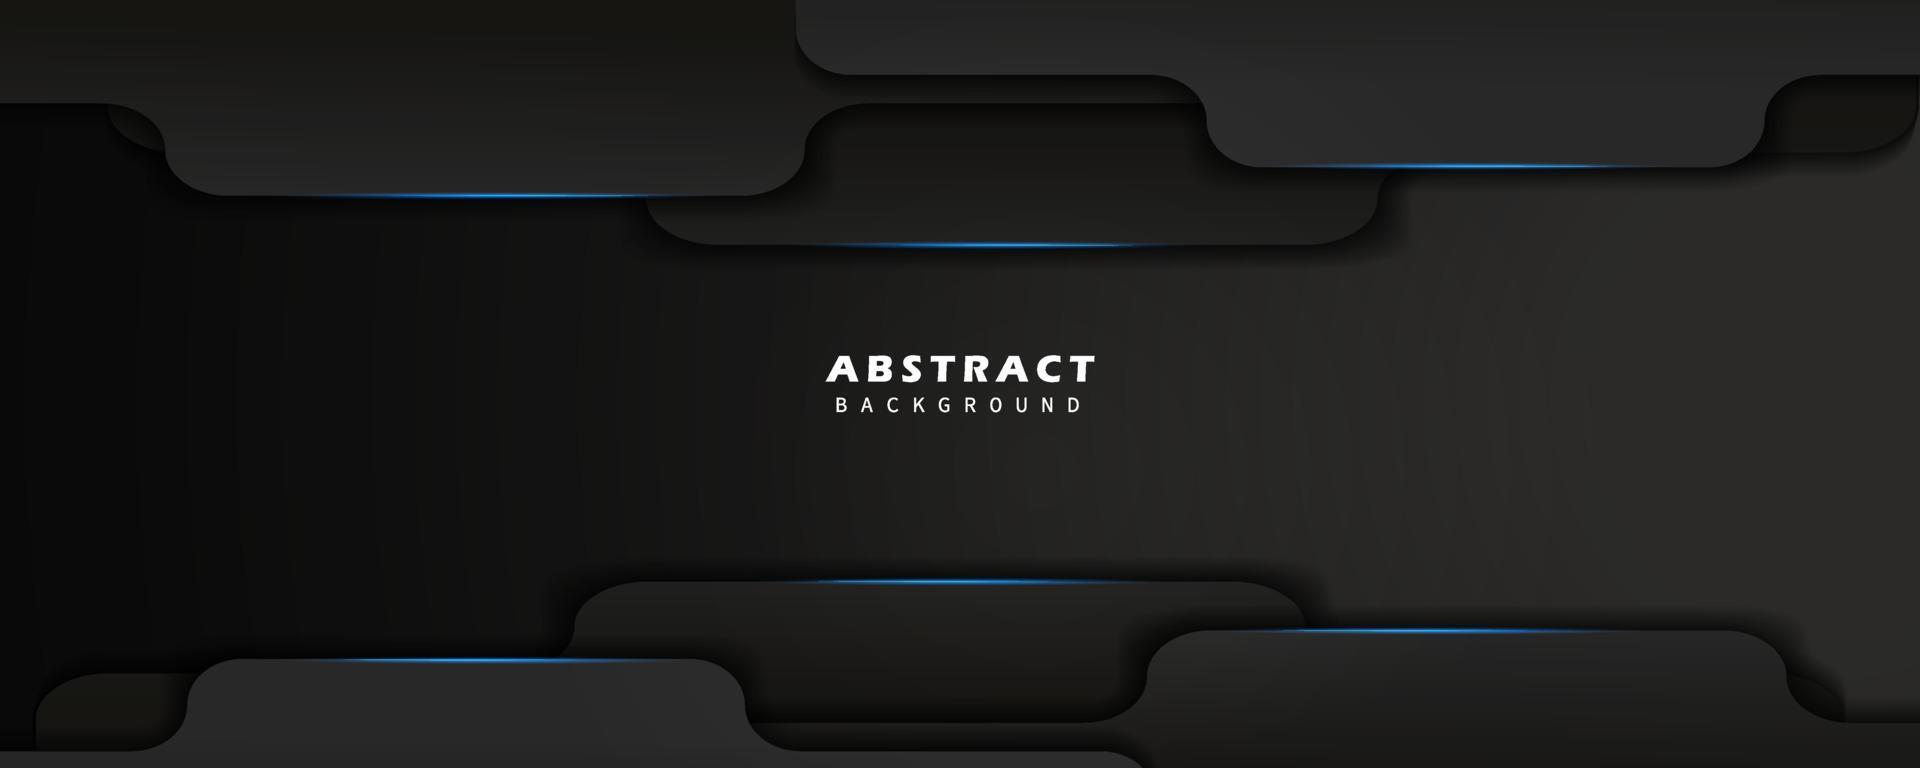 Abstract modern technology background vector